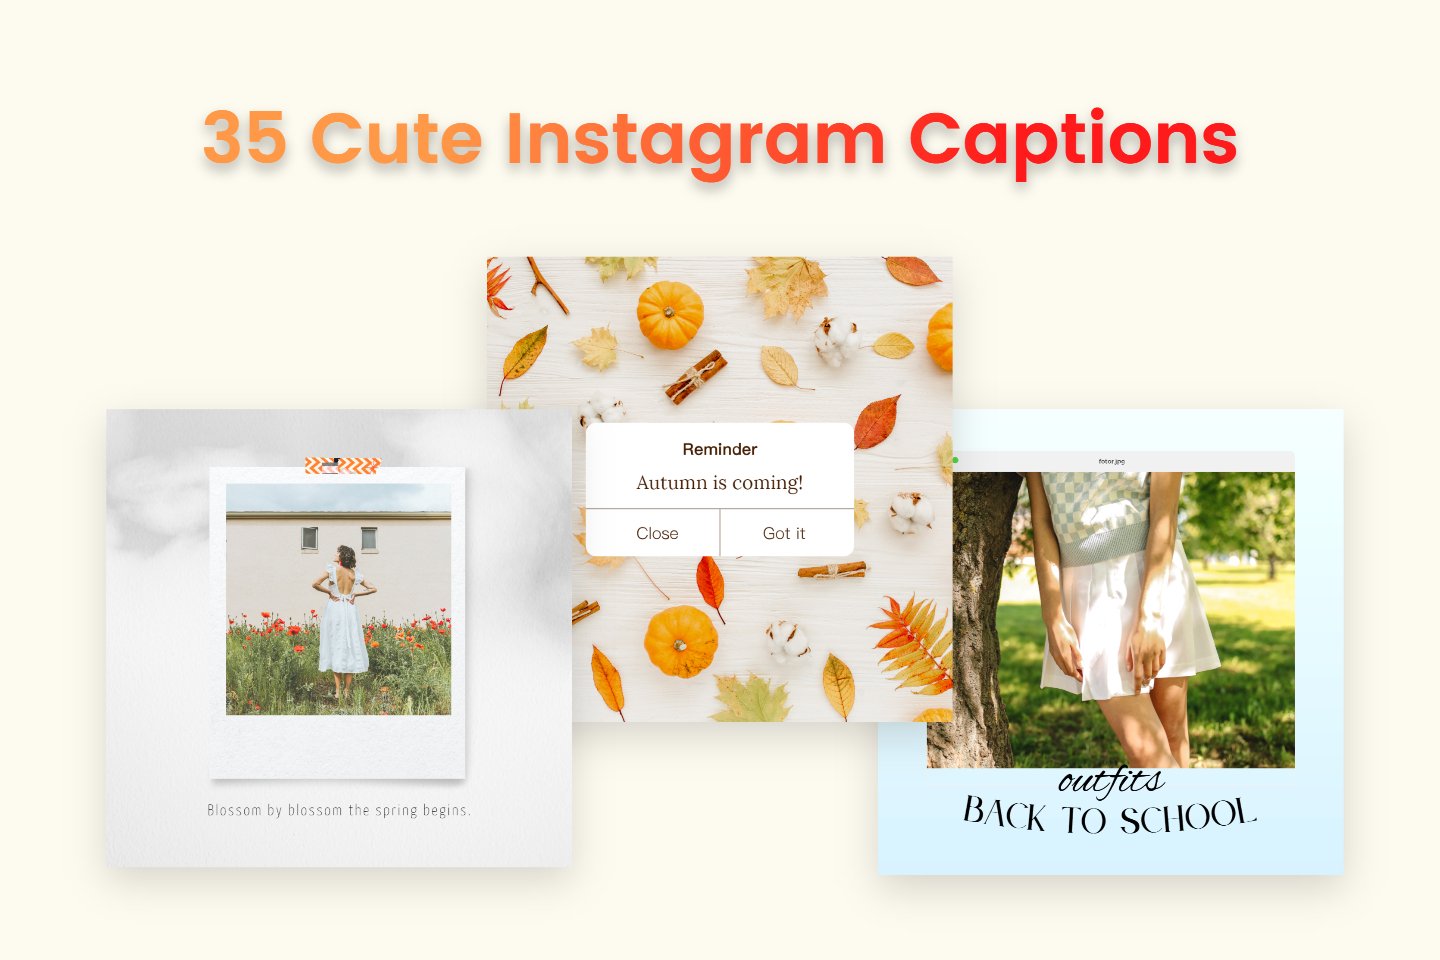 600+ Instagram Captions to Go With Any Post